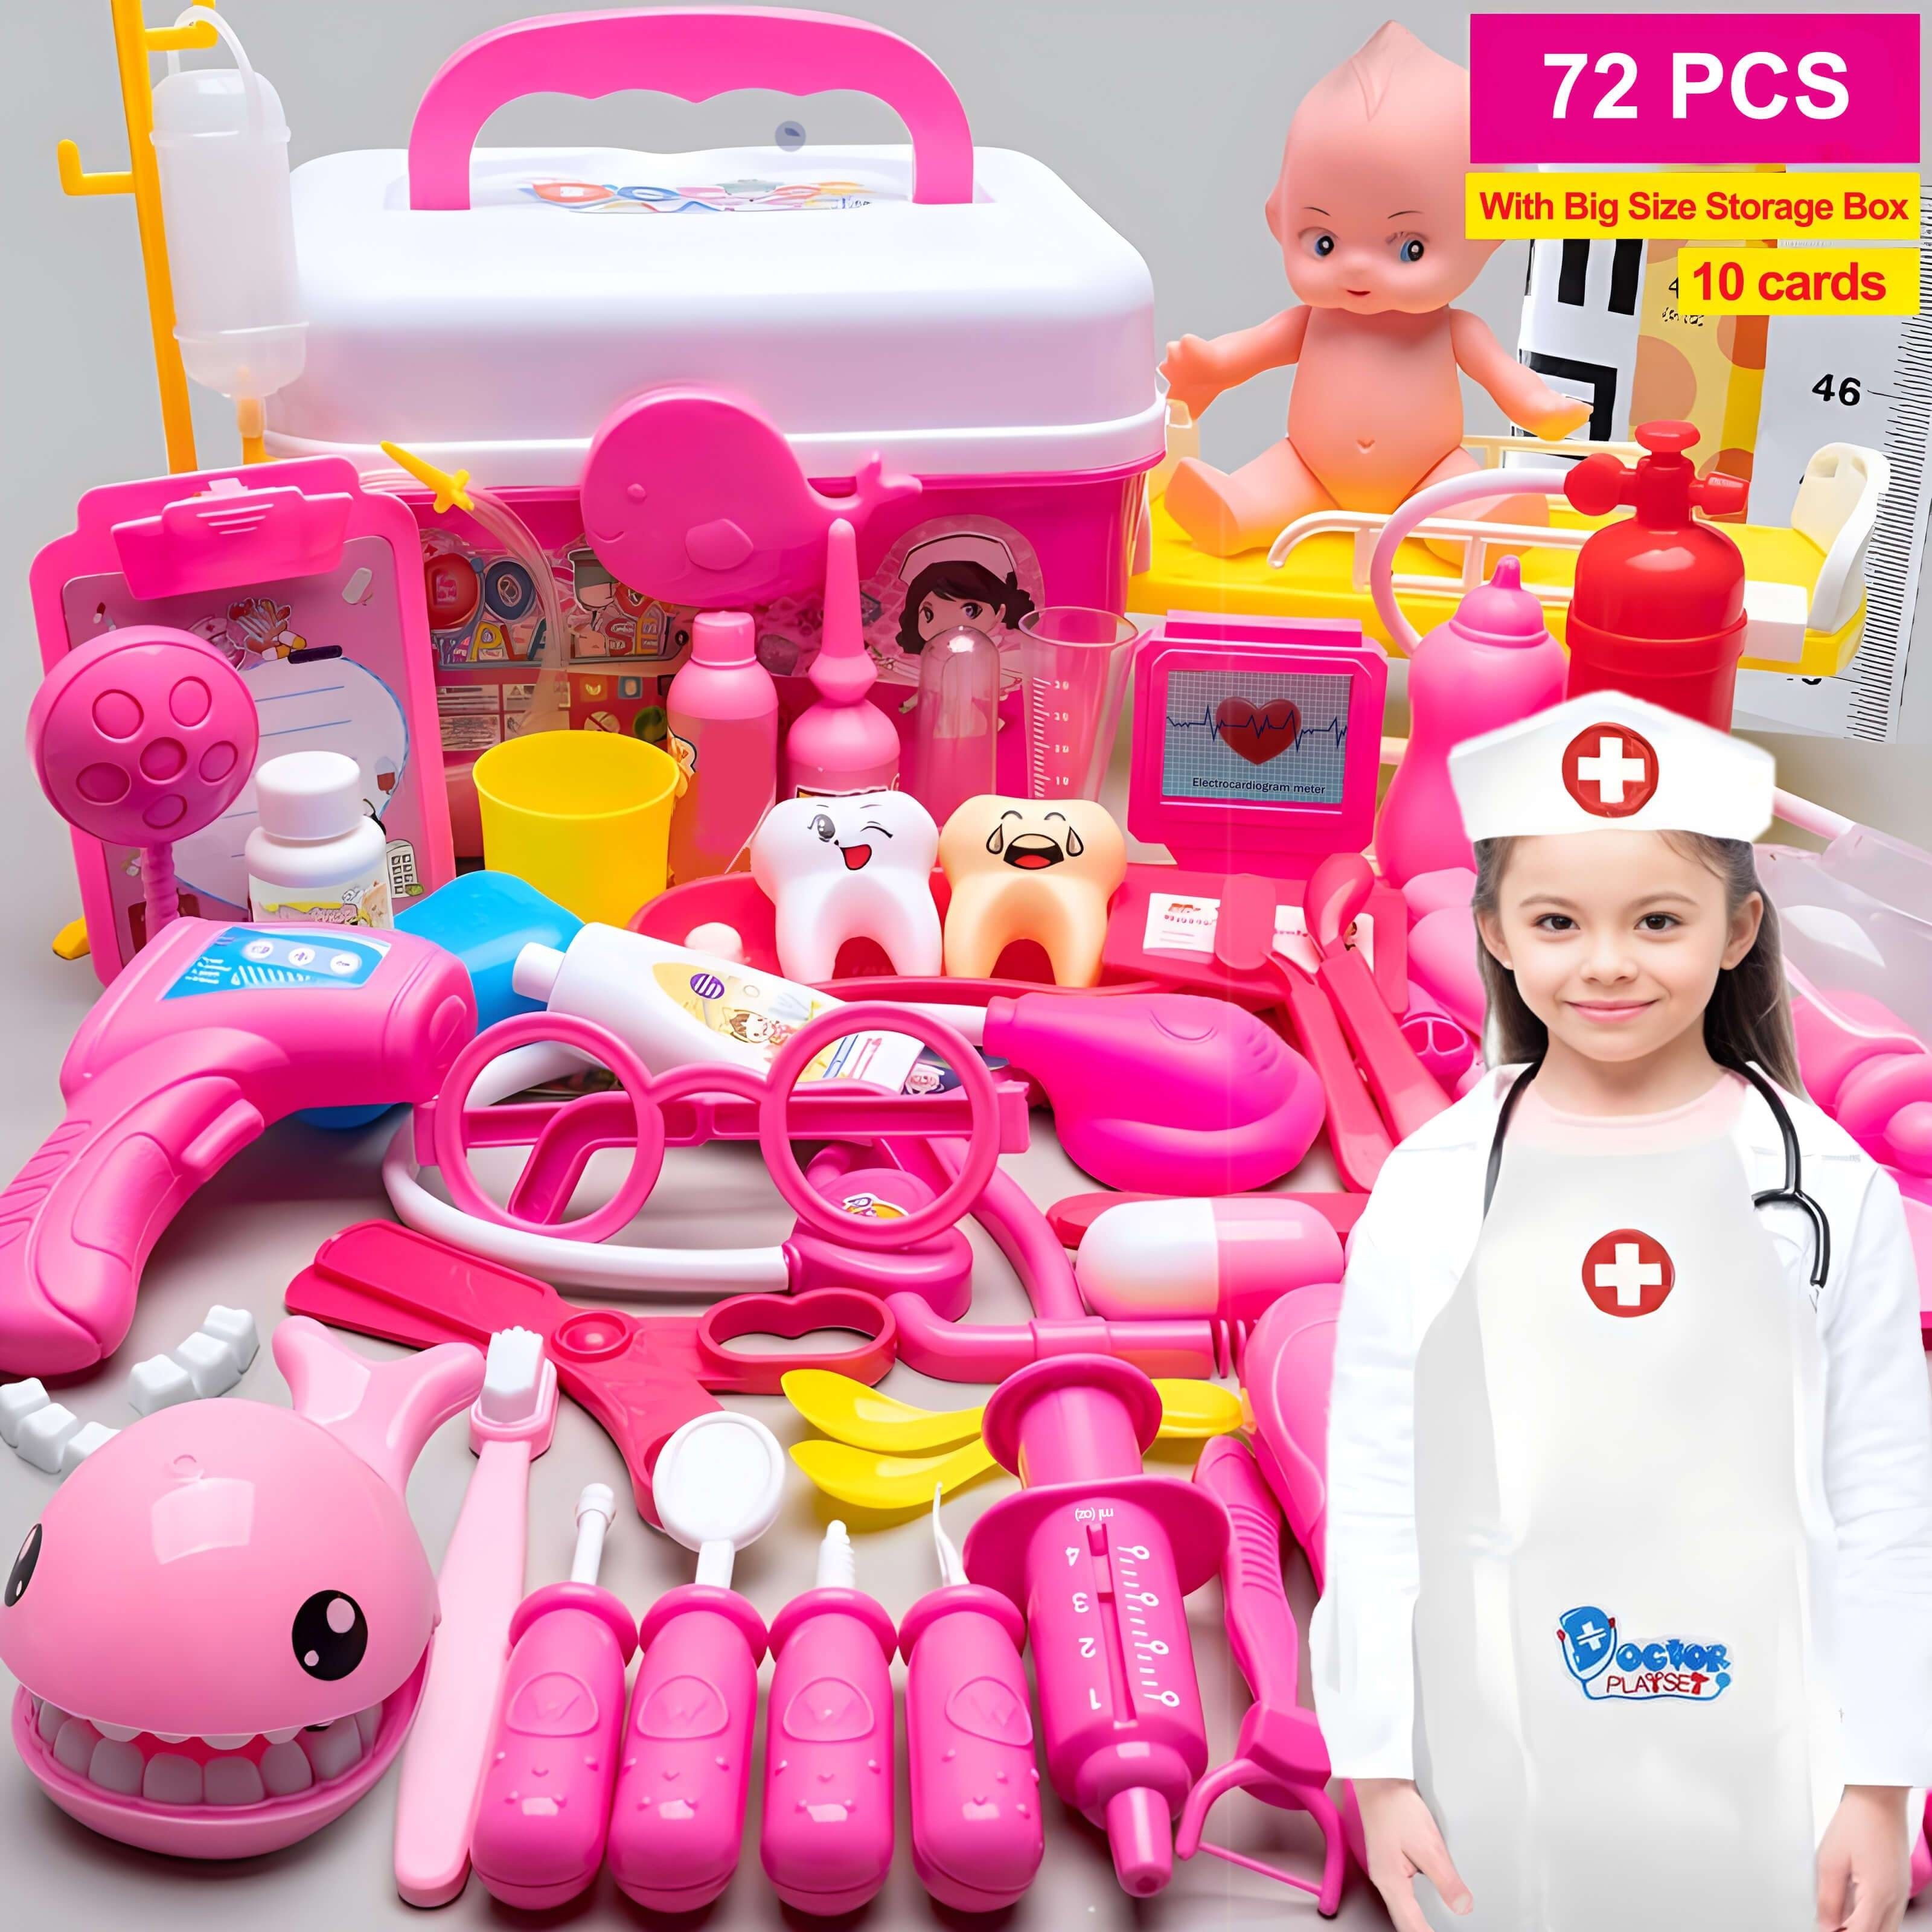 Taihexin 30 Pcs Play Doctor Kit for Kids 3-8 Years Old, Pretend Play Dress  Up Educational Dentist Doctor Set, Costume Stethoscope Medical Kit Role  Play Birthday Gifts for Girls Boys 